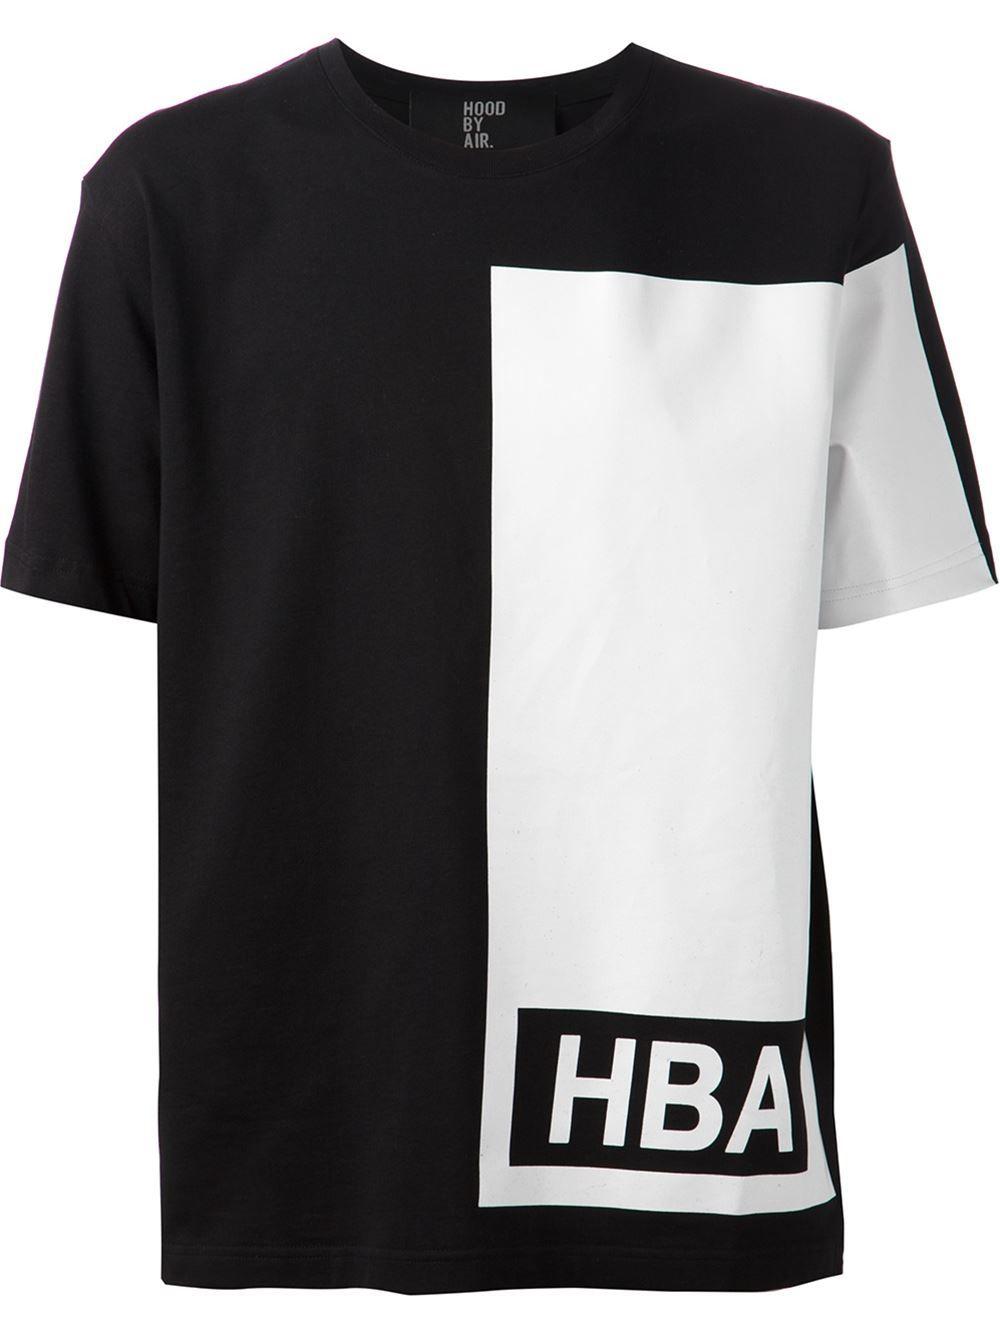 Hood by Air Clothing Logo - Hood By Air 'Illusion' Block T-Shirt in Black for Men - Lyst